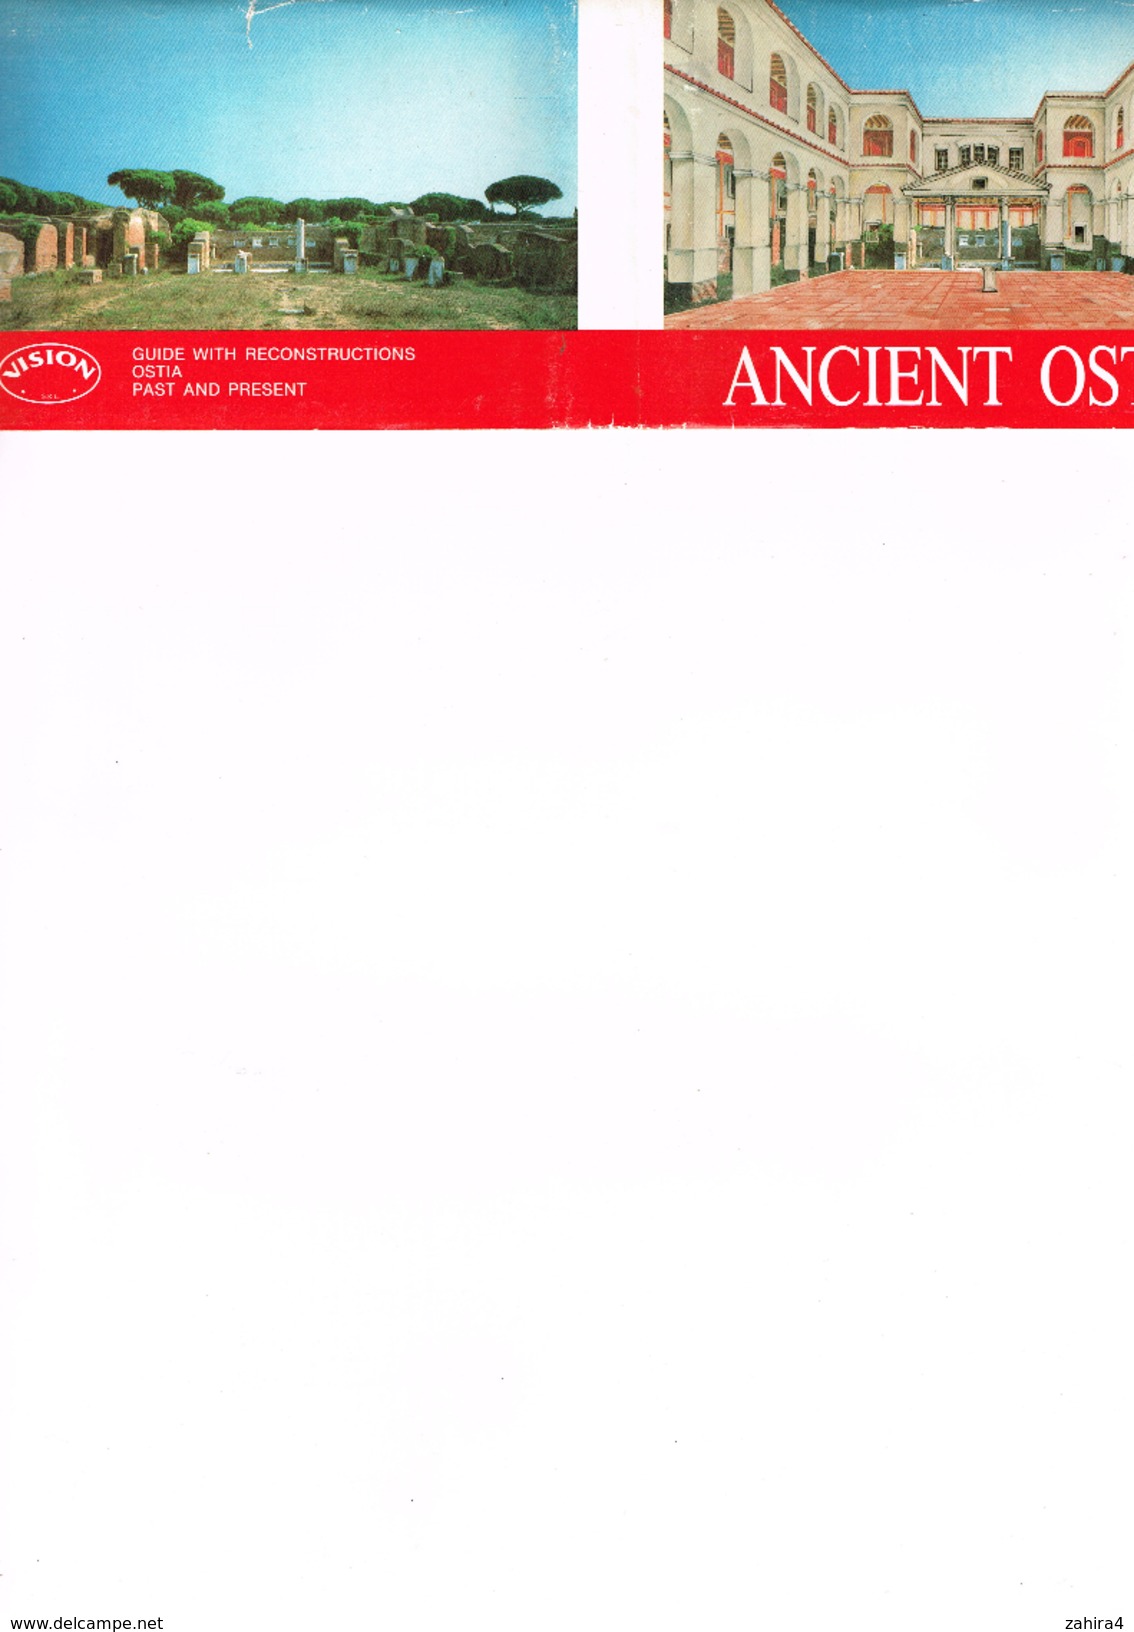 Ostia Past And Present Guide With Reconstruction Of Ancient Ostia Vision - Europa